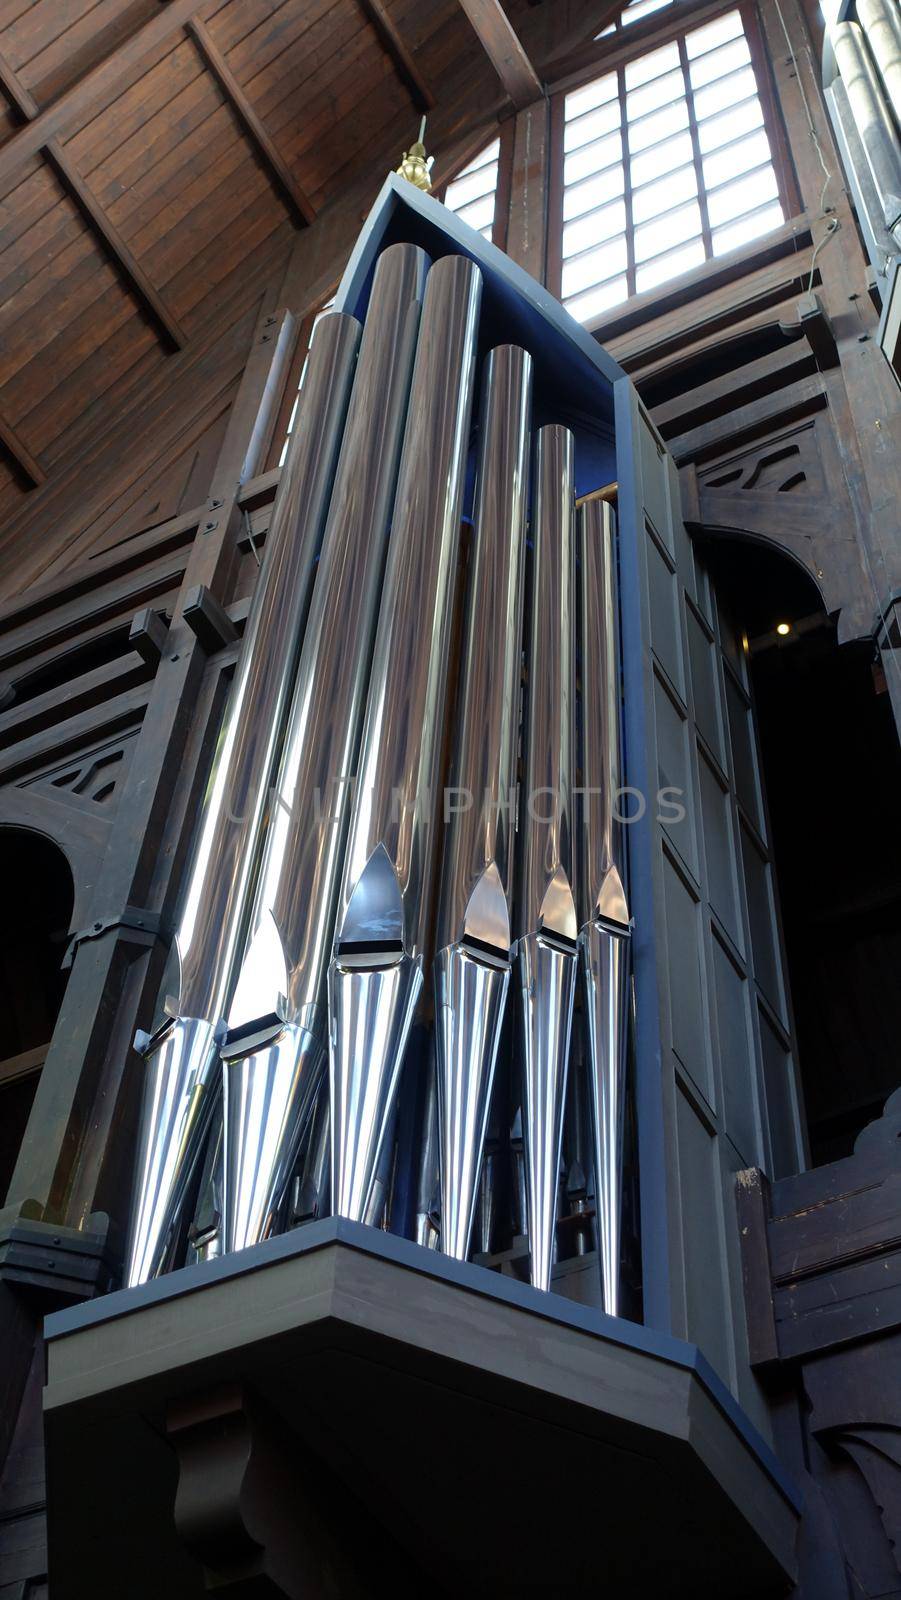 Detail of a pipe organ of a church in a small town in northern Sweden